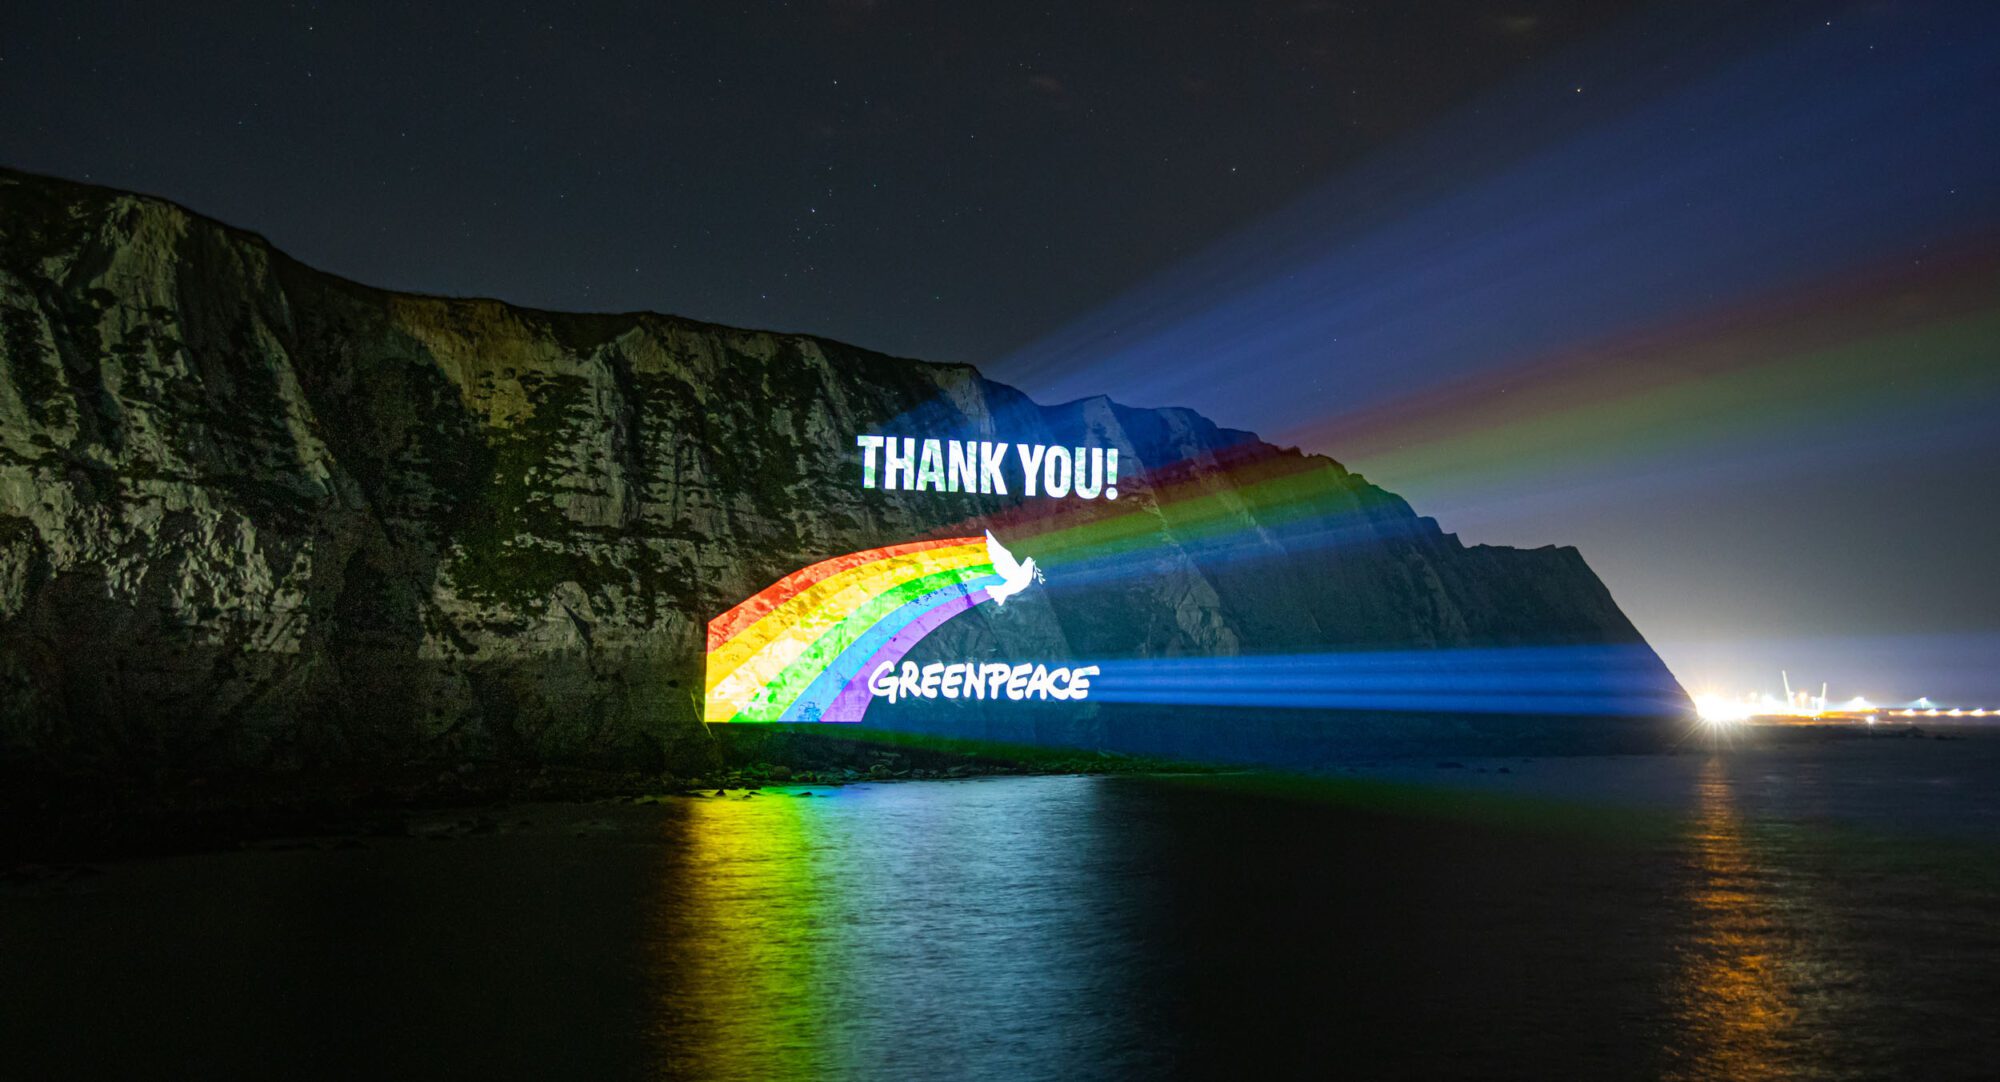 An image of a cliff at night with a projection reading "Thank you" with a rainbow streaming from behind a white bird. and the word Greenpeace